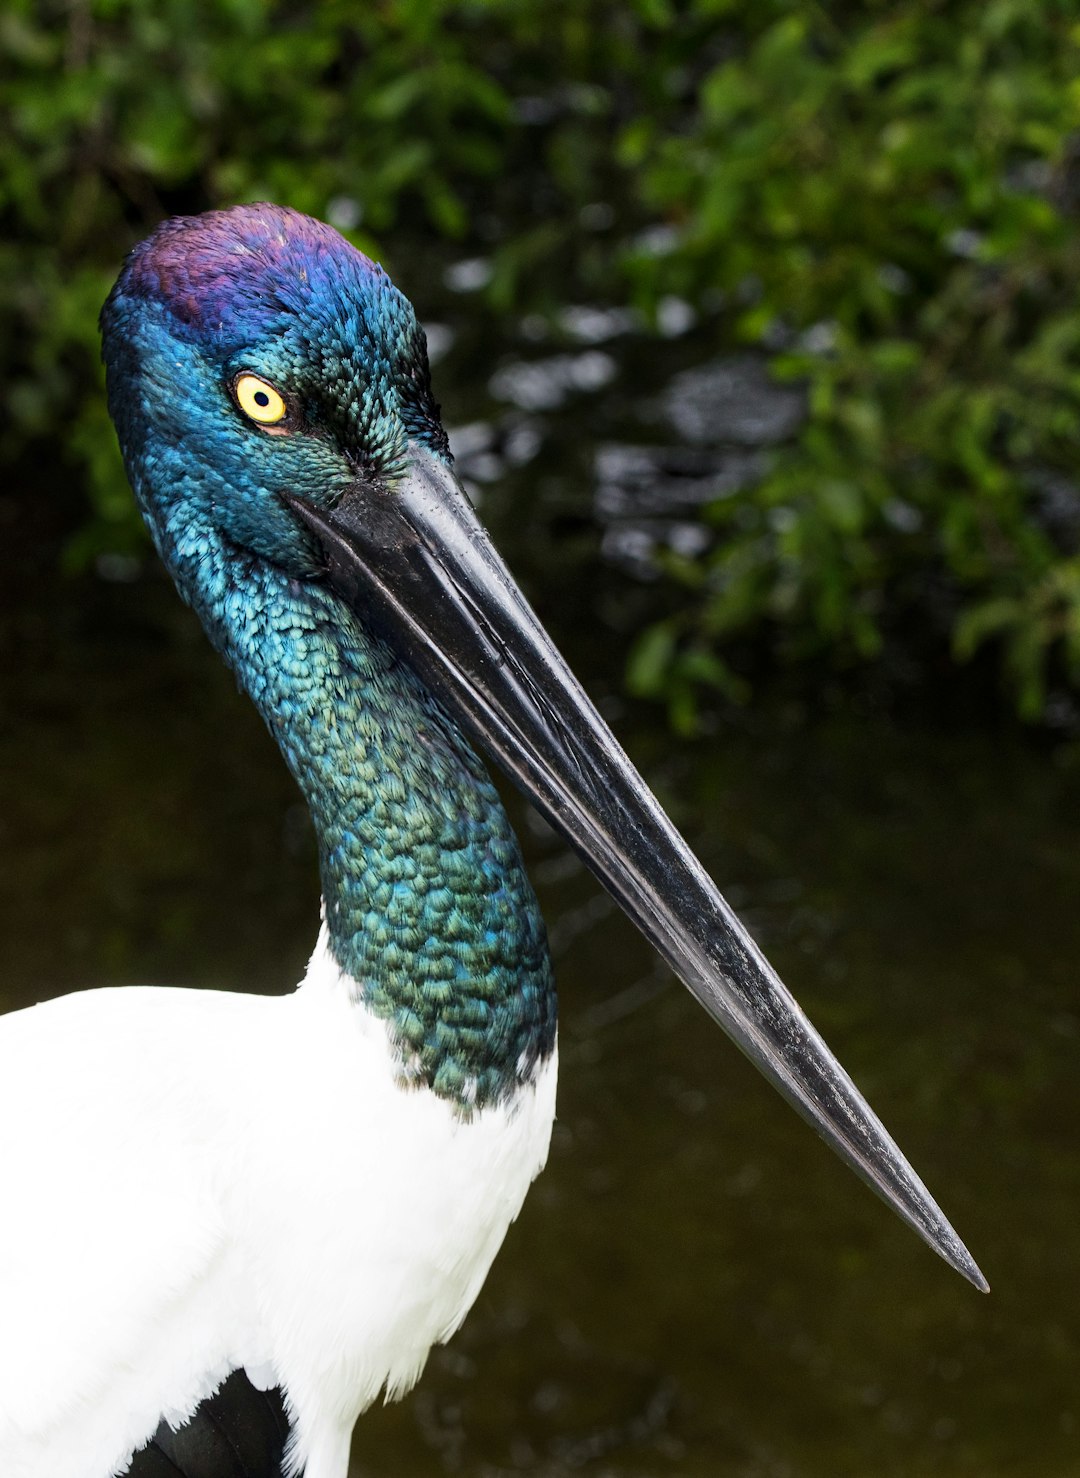 The feathers of the black-necked stork or Jabiru are a beautiful iridescent colour. The female birds have yellow eyes, while the males have black eyes.